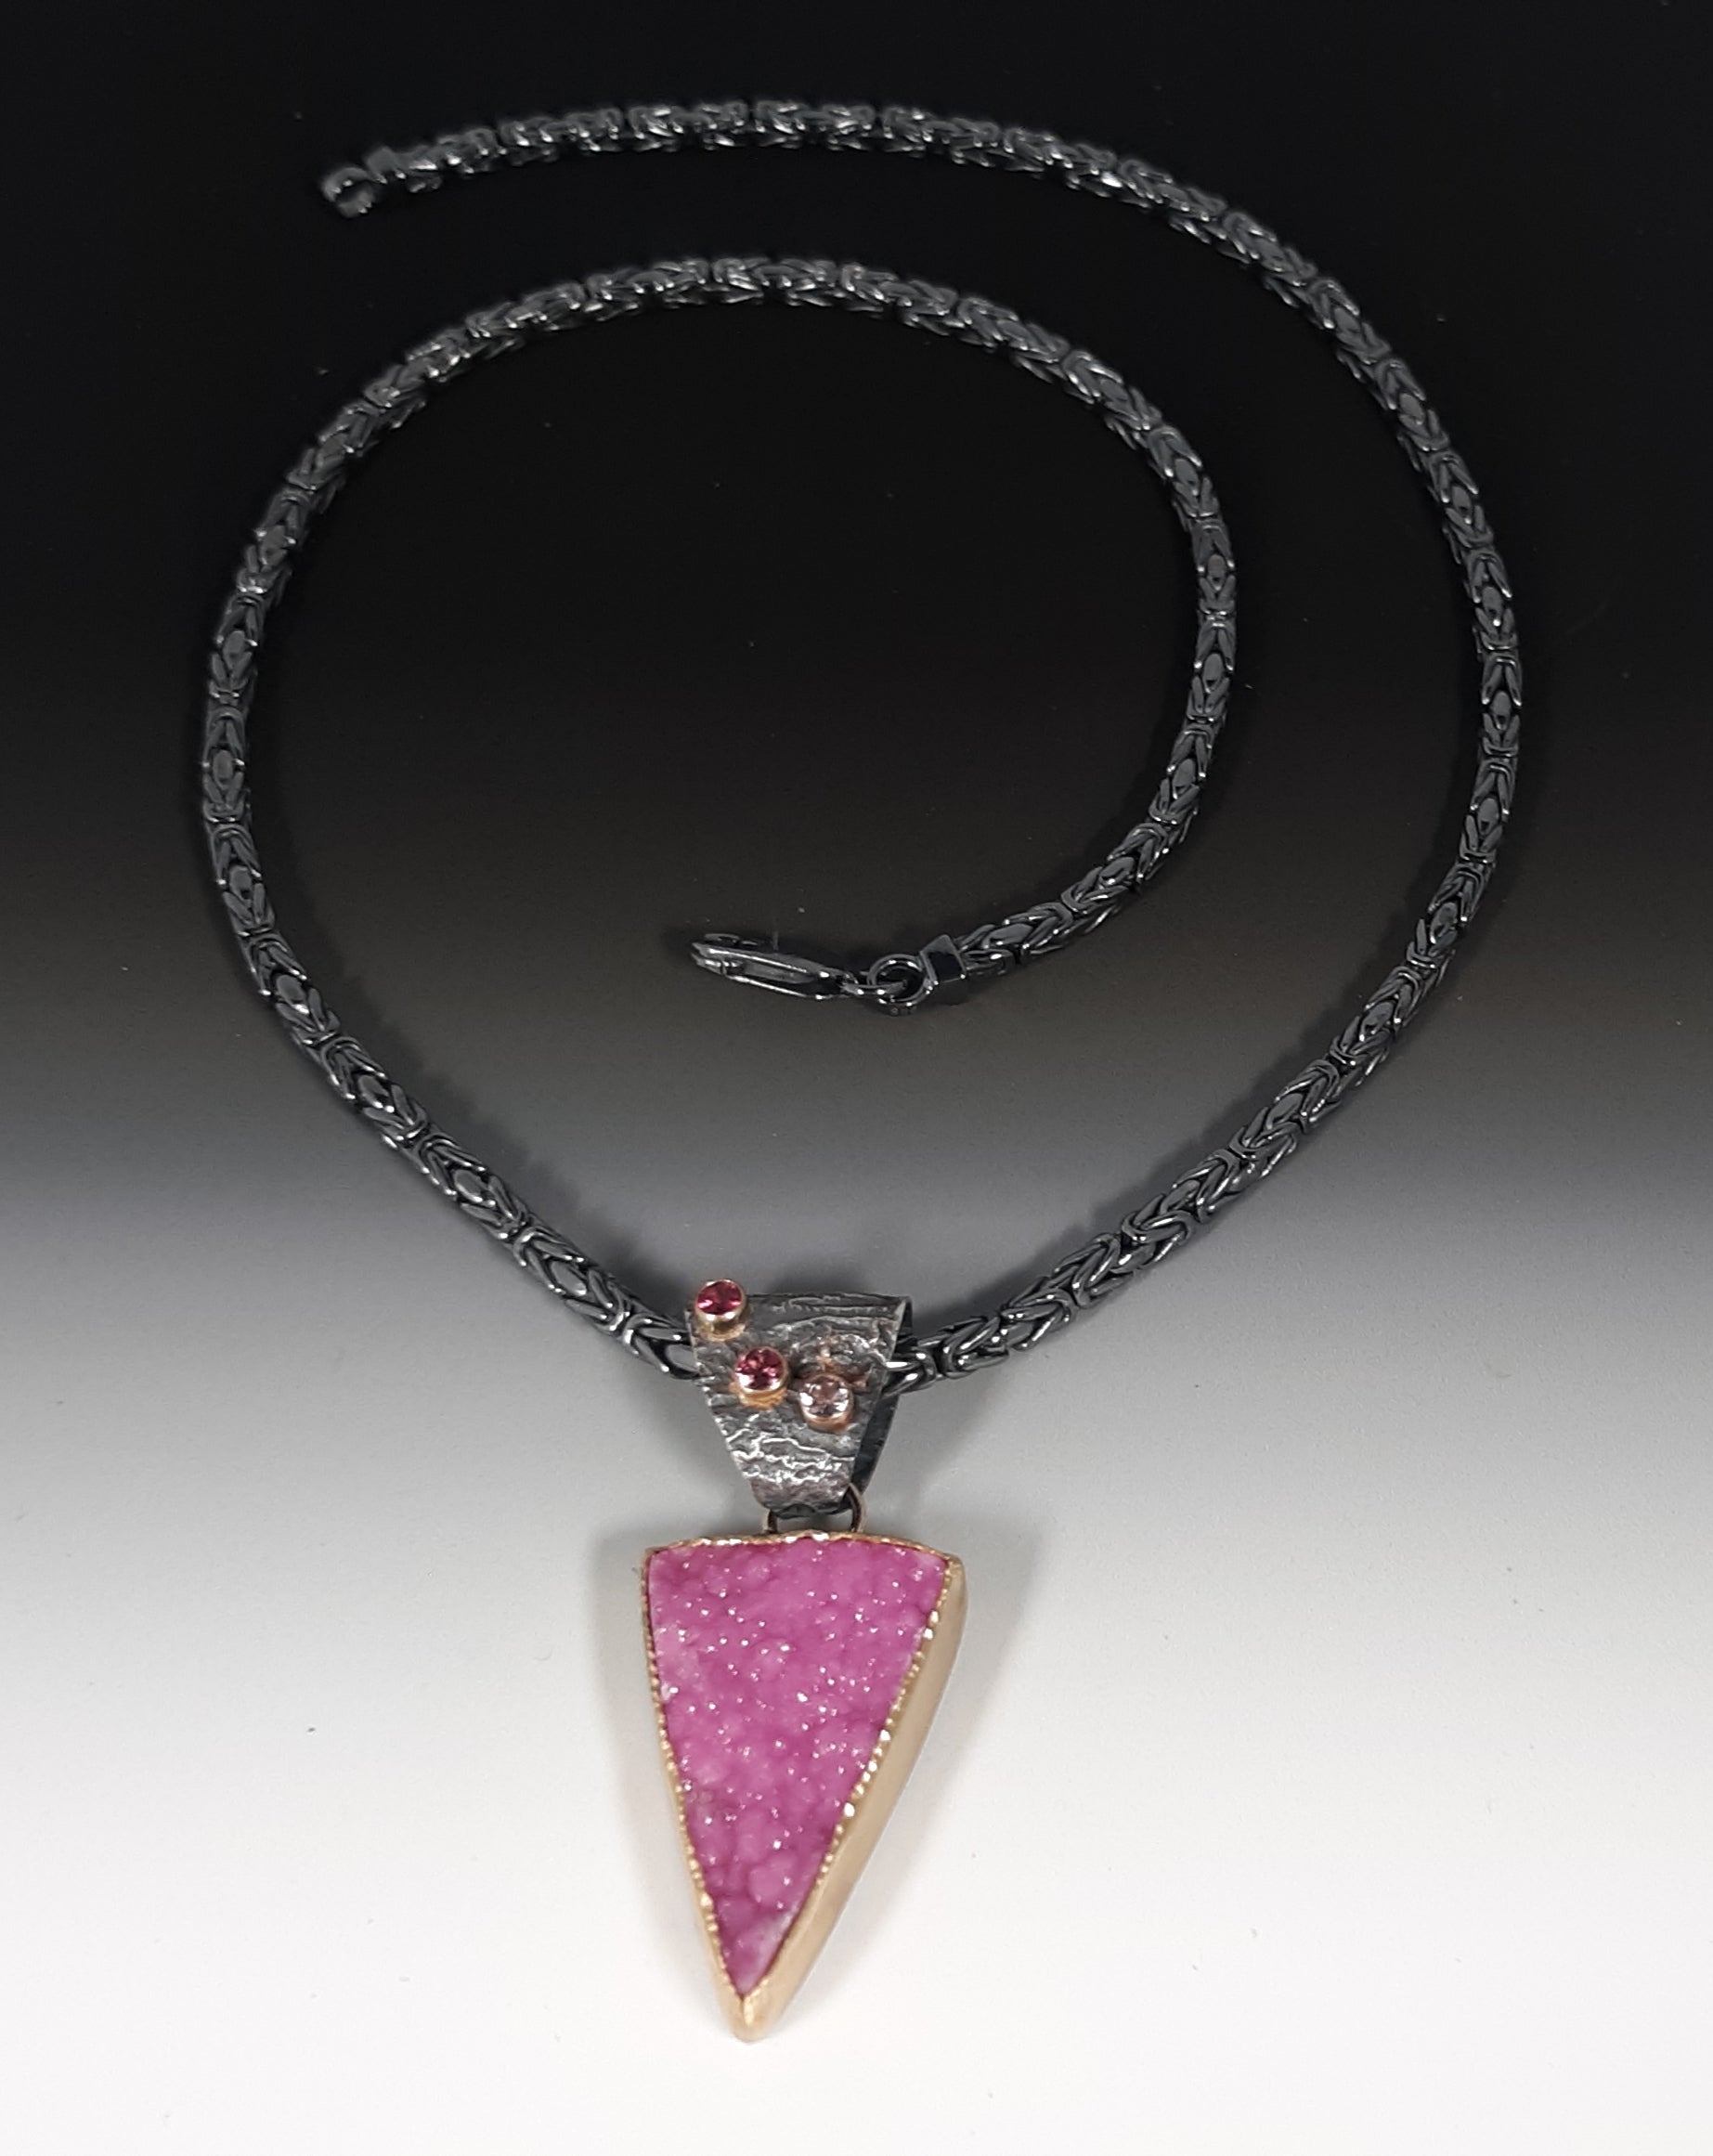 "Blushed" - SS, 18kt gold, Cobalto Calcite drusy, three pink sapphires